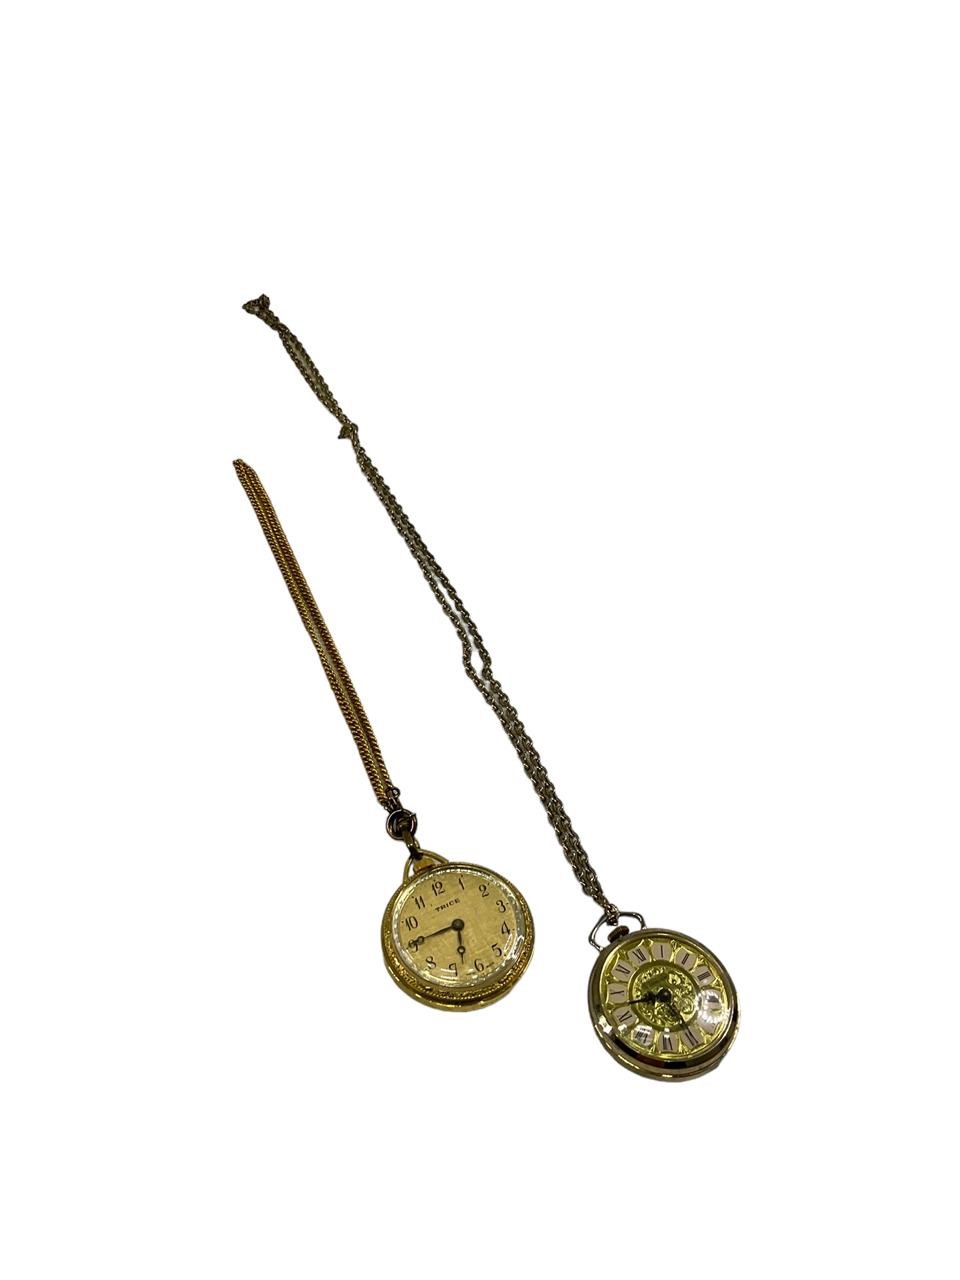 2 Vintage Small Pocket Watches